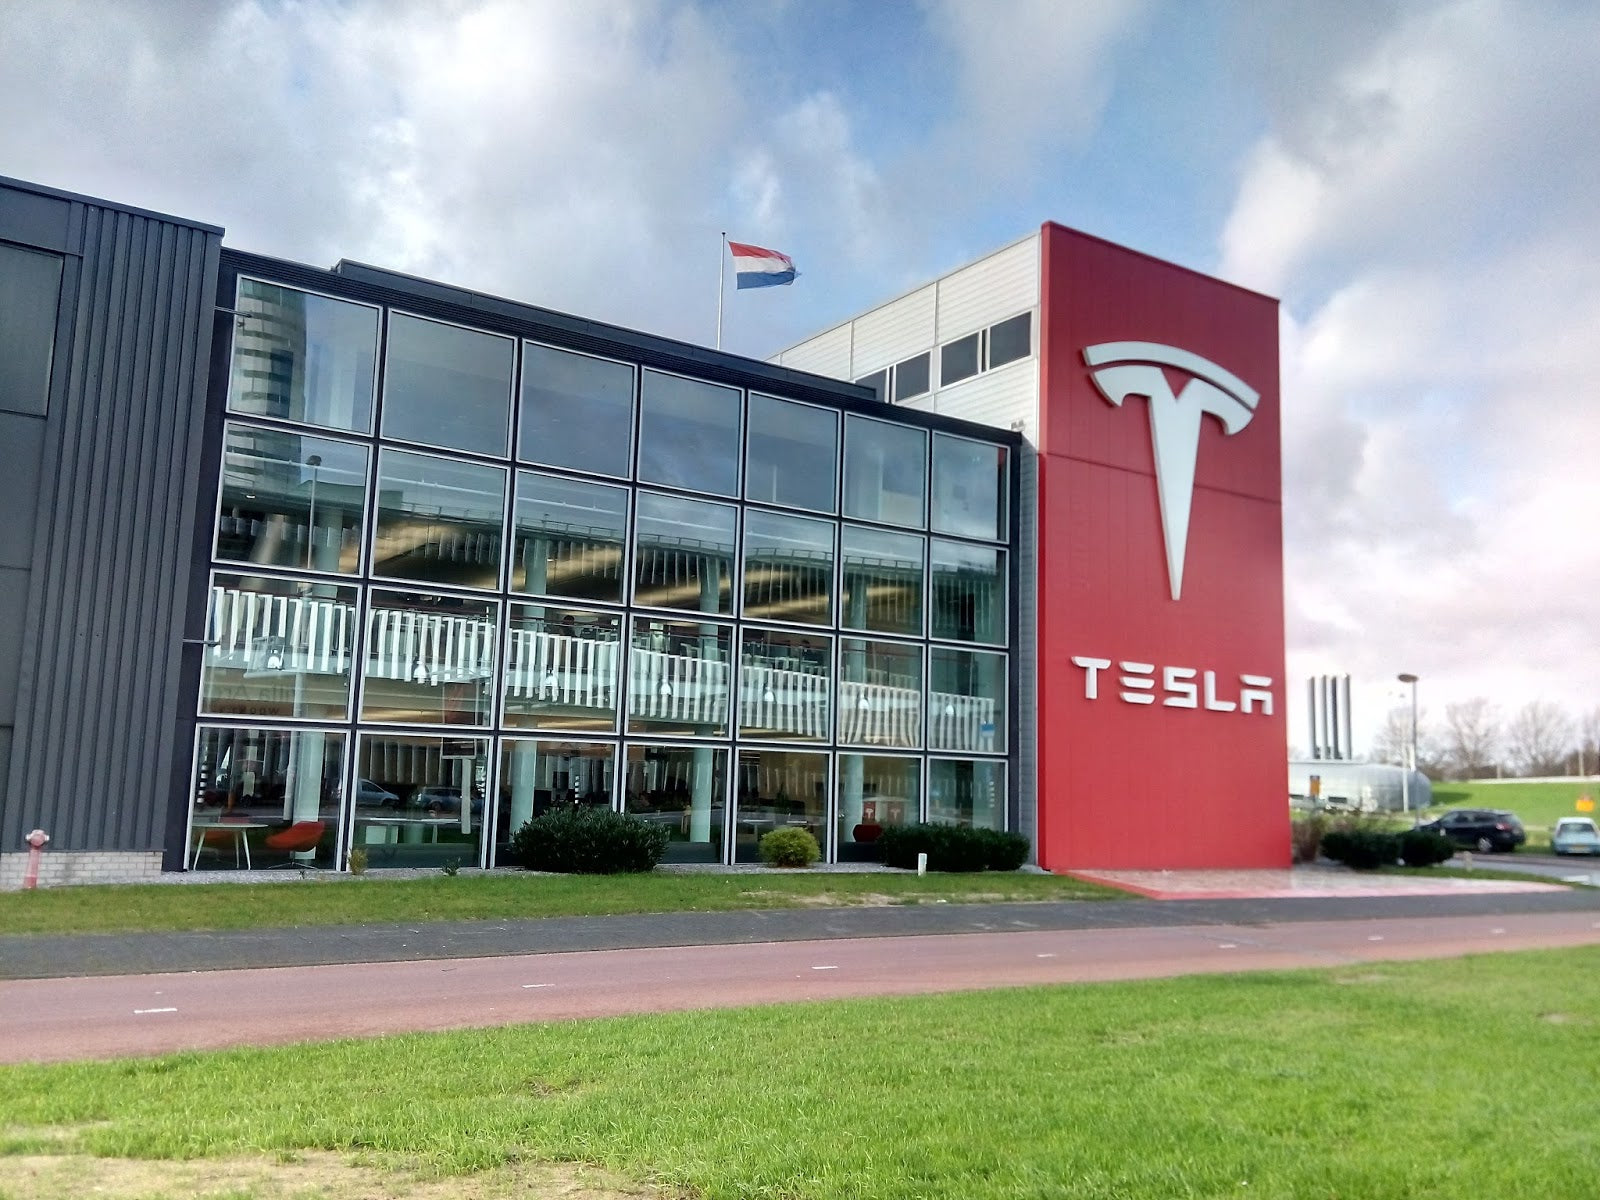 Tesla Showroom & Service Center Coming to Brownsville, Texas, Mayor Confirms